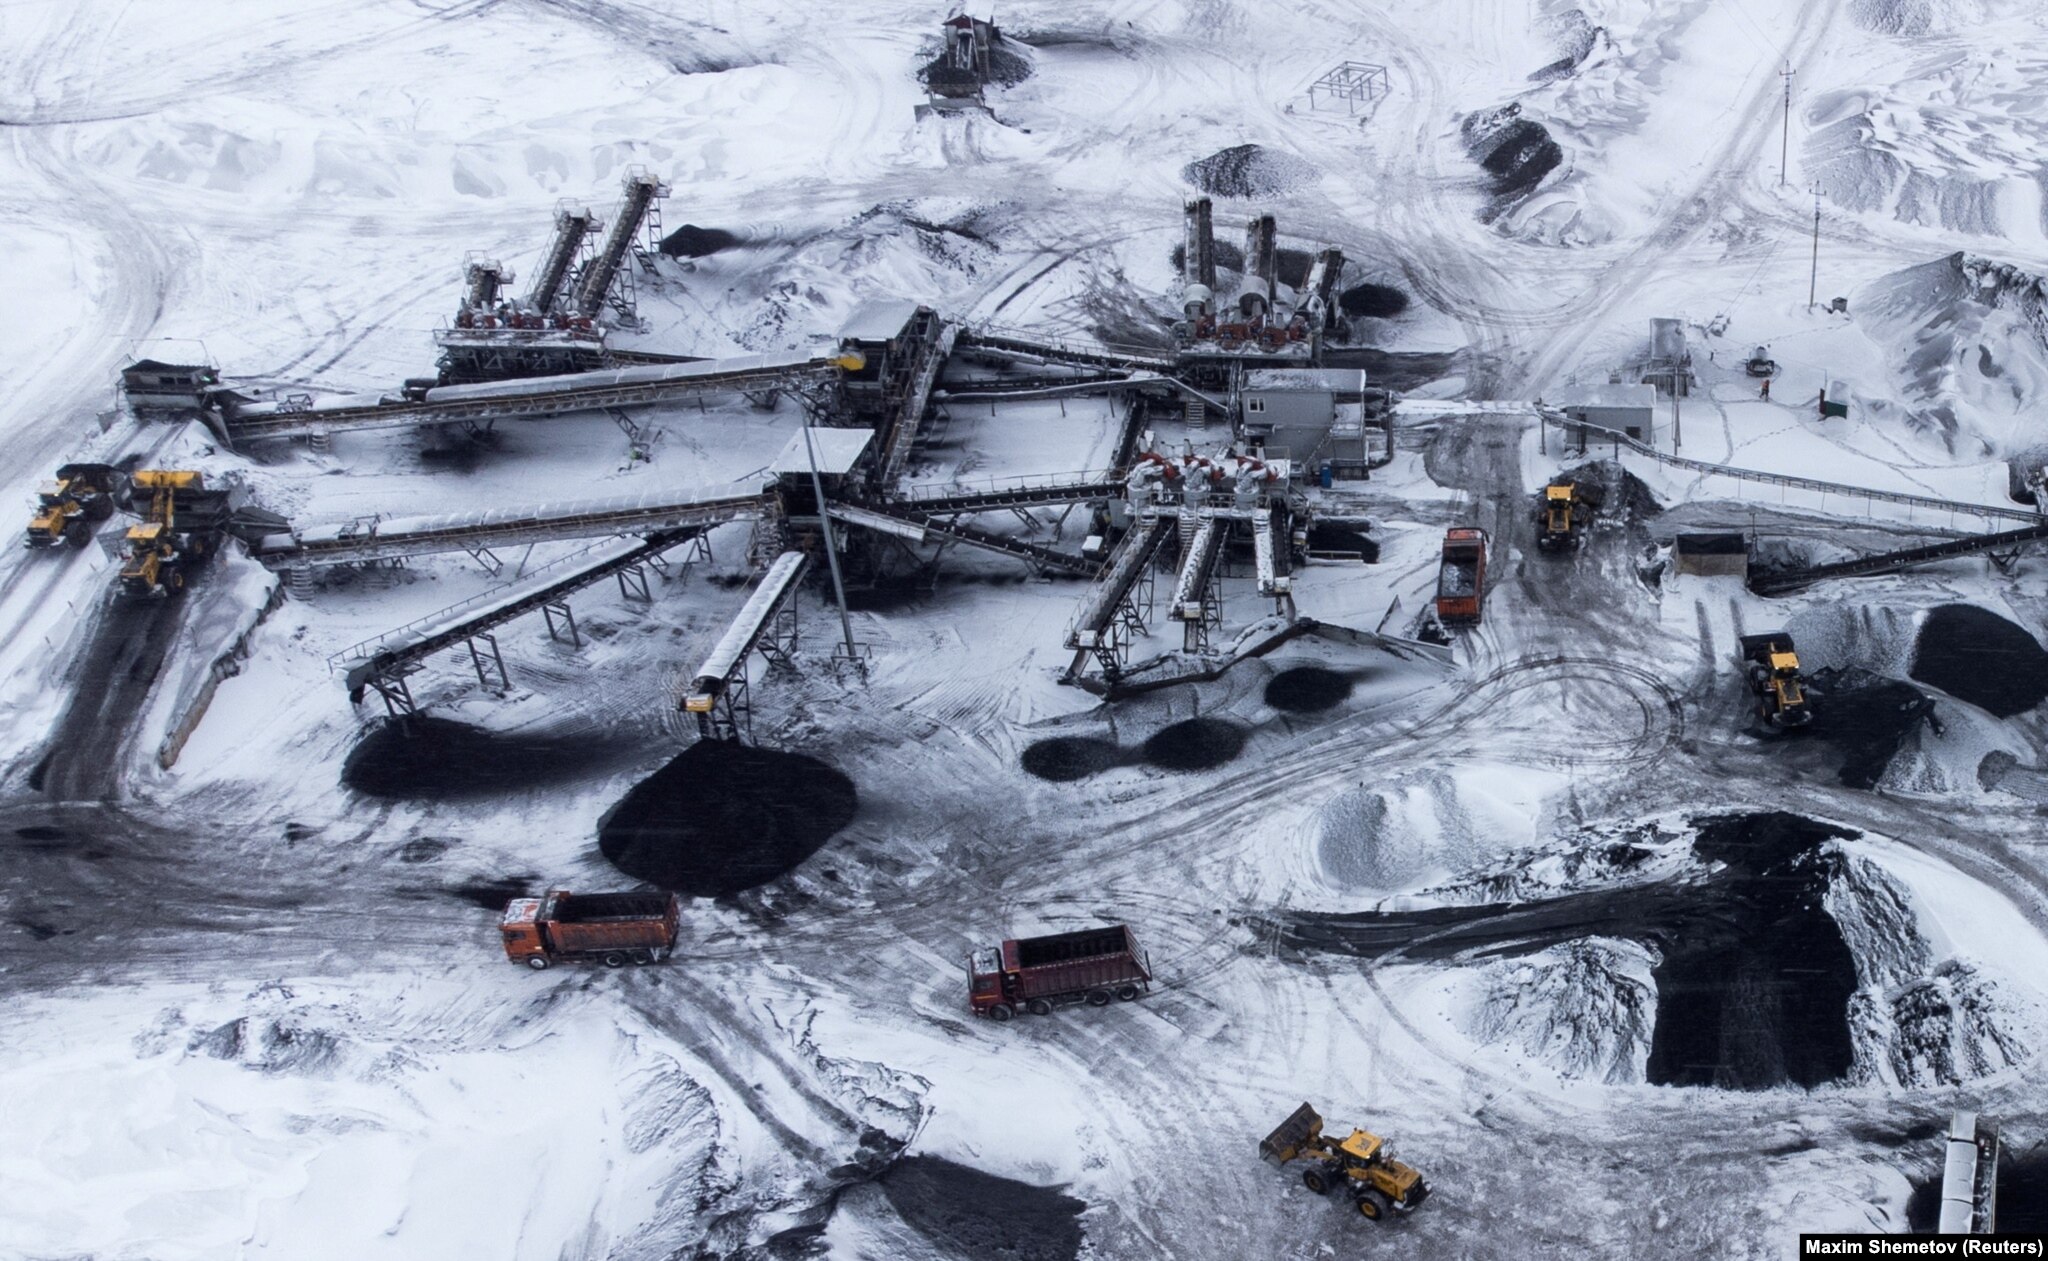 An aerial view shows operations at the Razrez Inskoy coal mine in the Kemerovo region of Russia on November 28.